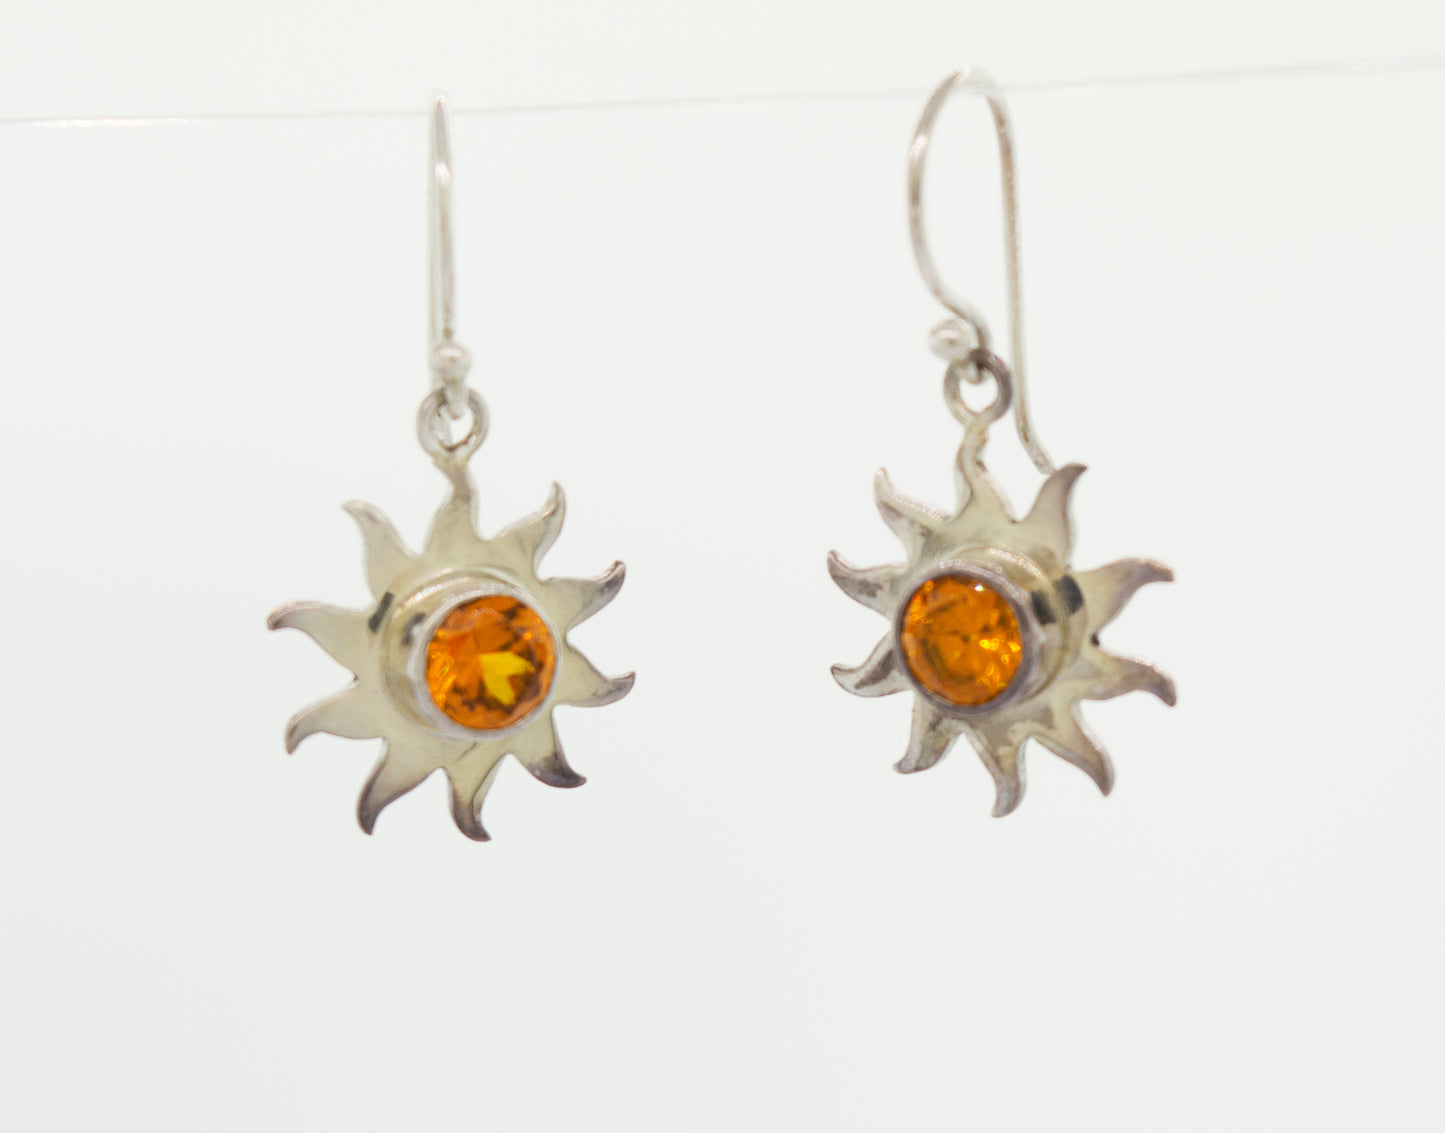 A pair of Super Silver Citrine Sunburst Earrings with radiant amber stones in a sunburst setting.